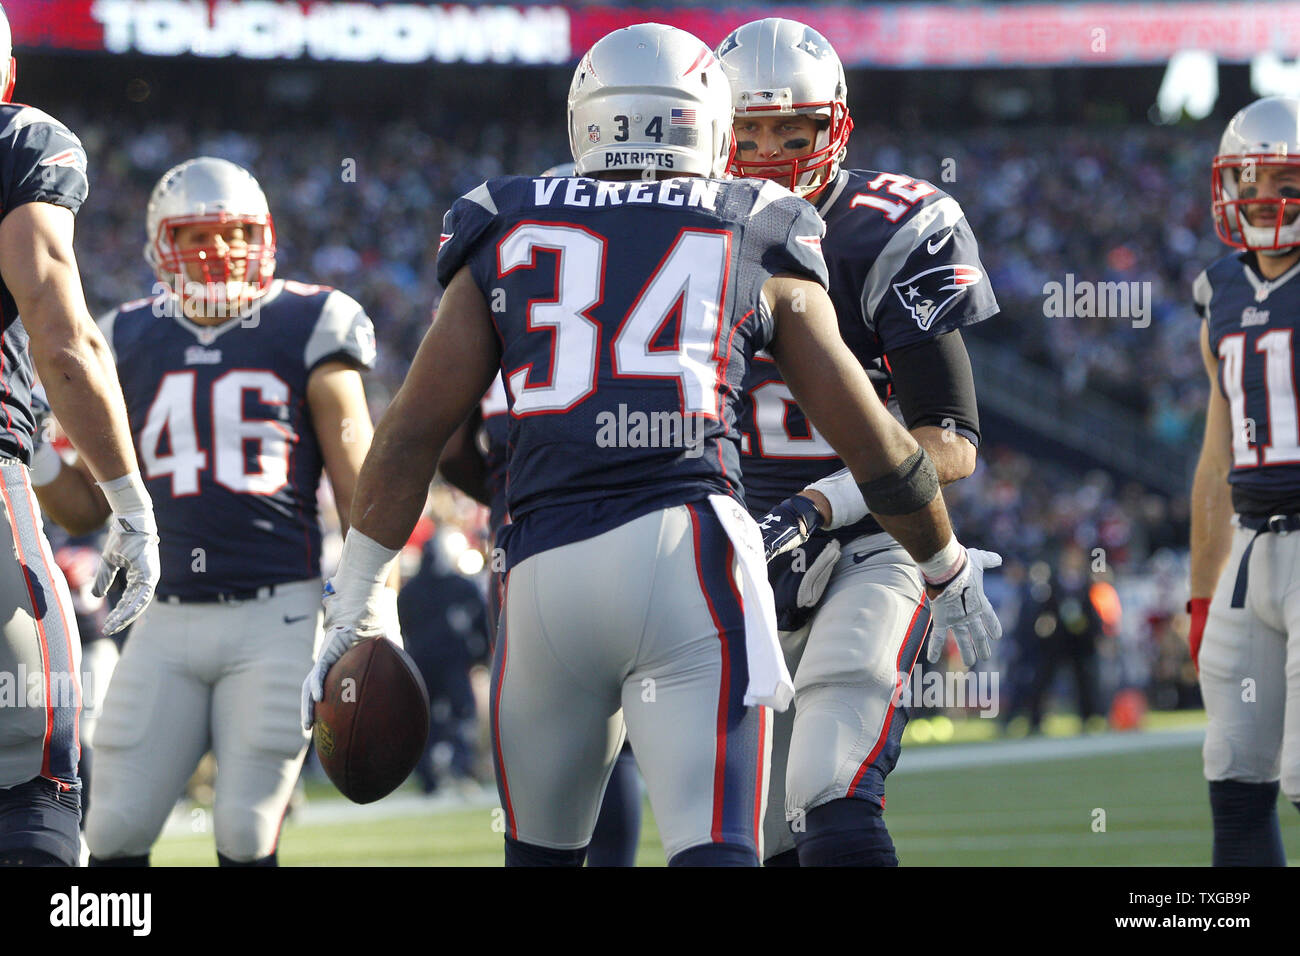 New England Patriots running back Shane Vereen (34) is congratulated by quarterback Tom Brady (12) after his three-yard touchdown carry in the second quarter against the Miami Dolphins at Gillette Stadium in Foxborough, Massachusetts on December 14, 2014.   UPI/Matthew Healey Stock Photo